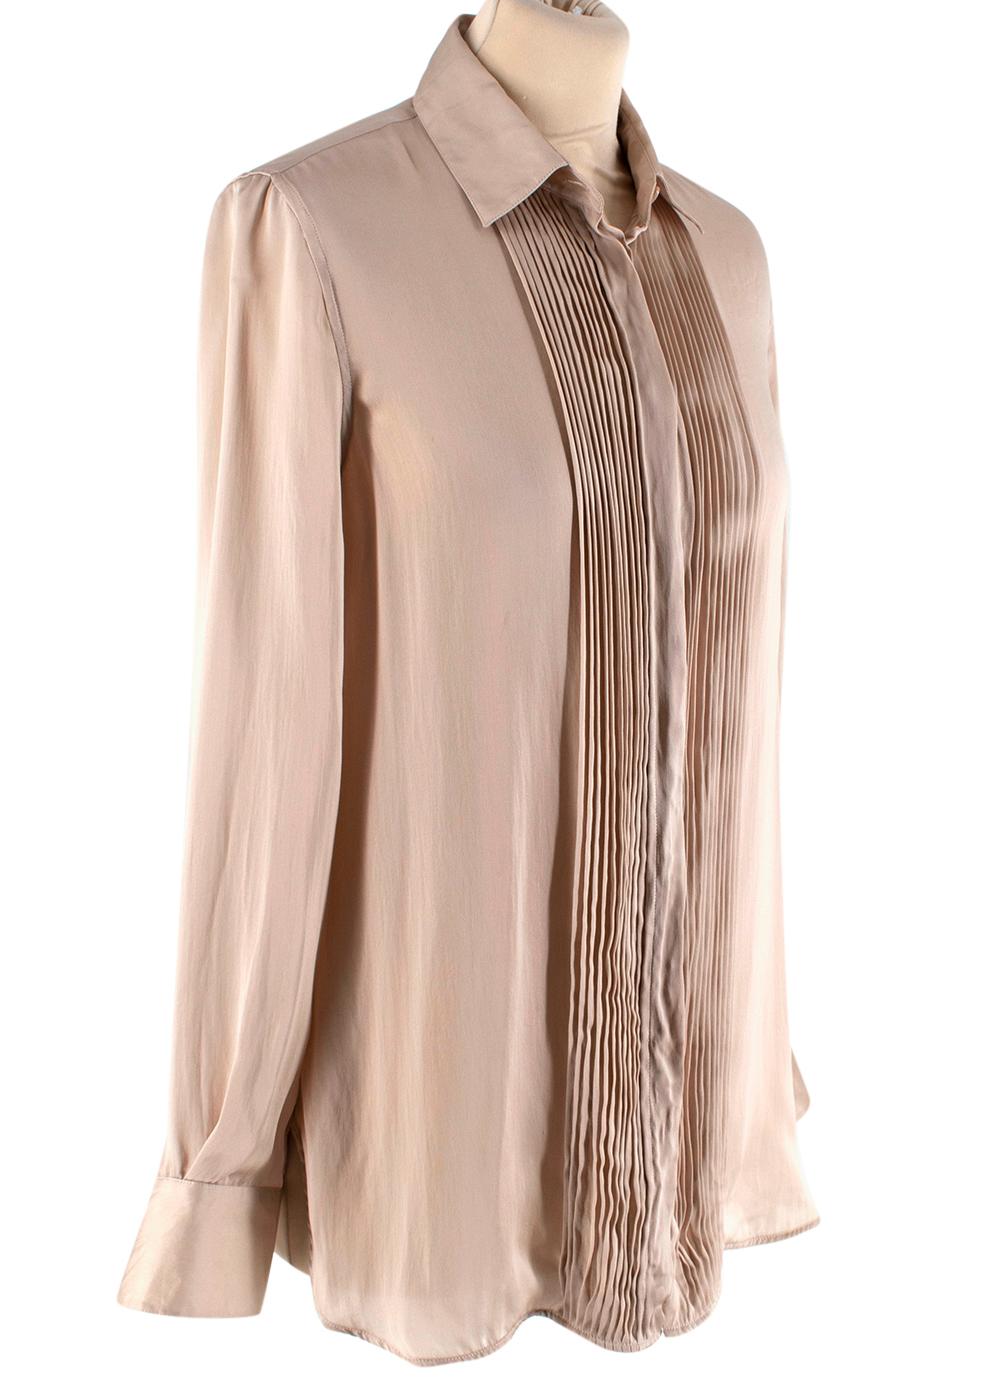 Loro Piana Beige Silk Satin Pleated Shirt

- Luxurious extra soft silk satin texture 
- Classic long sleeve cut 
- Gorgeous pleated details to the front 
- Neutral, easy to style creamy beige hue  
- Concealed button fastening to the front 
- Pleat